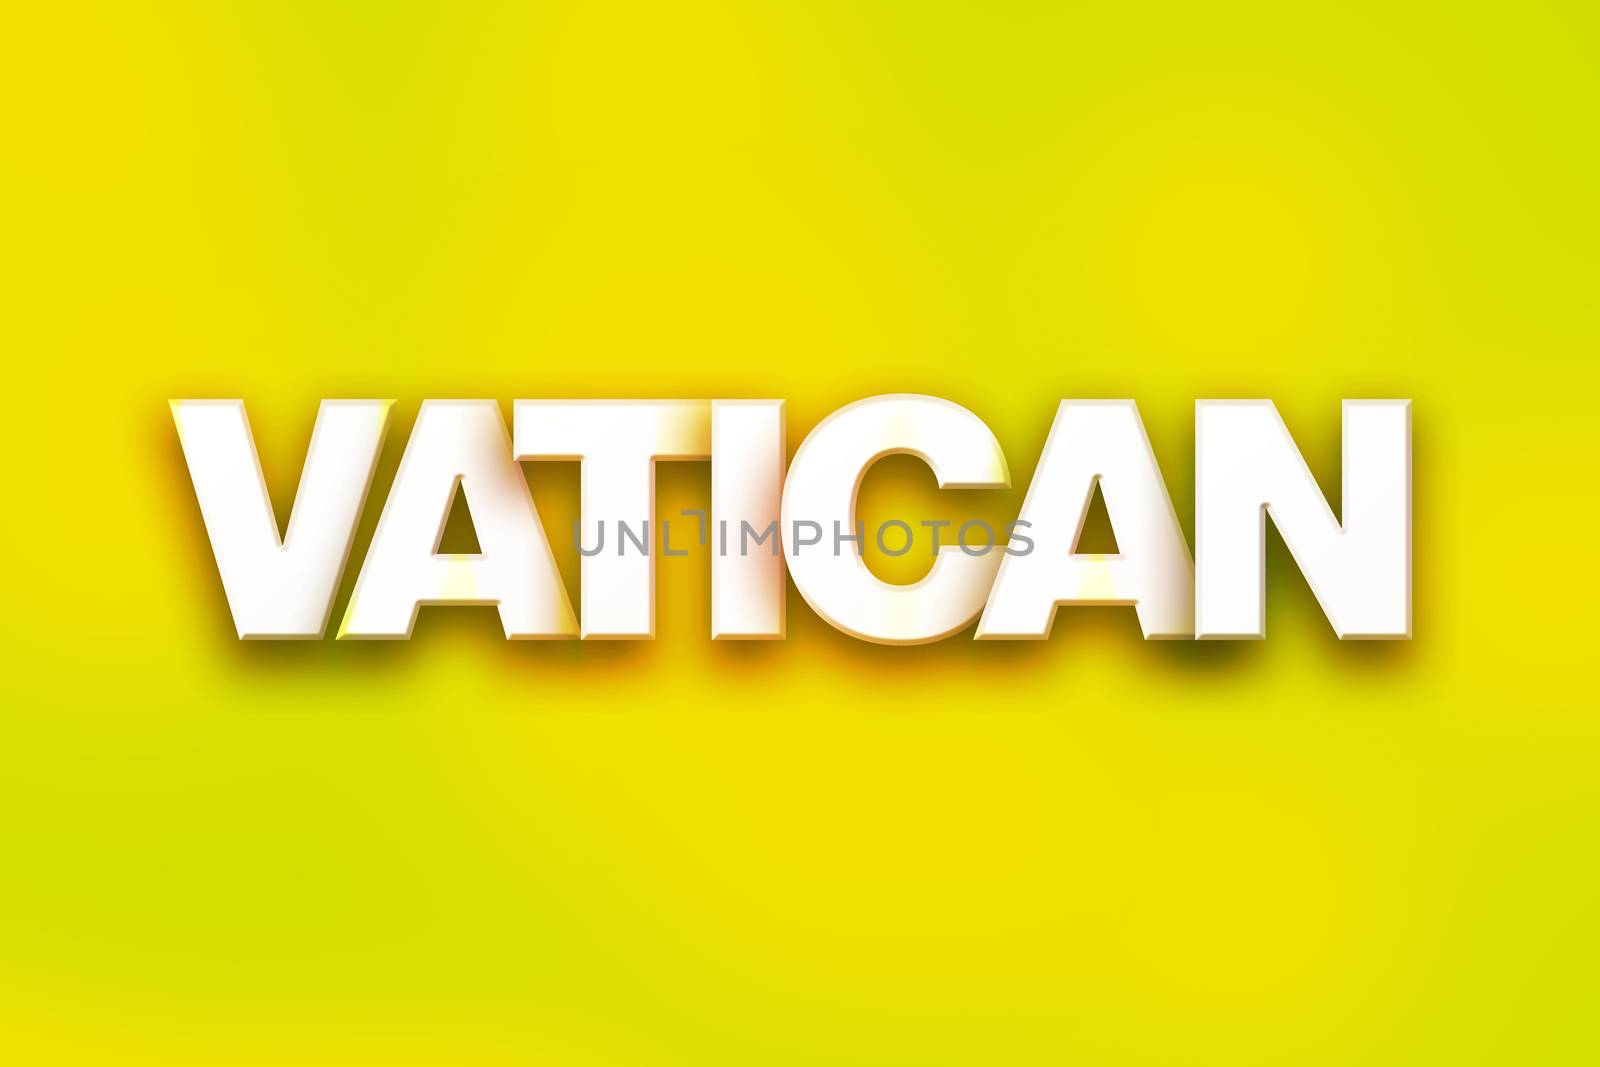 The word "Vatican" written in white 3D letters on a colorful background concept and theme.